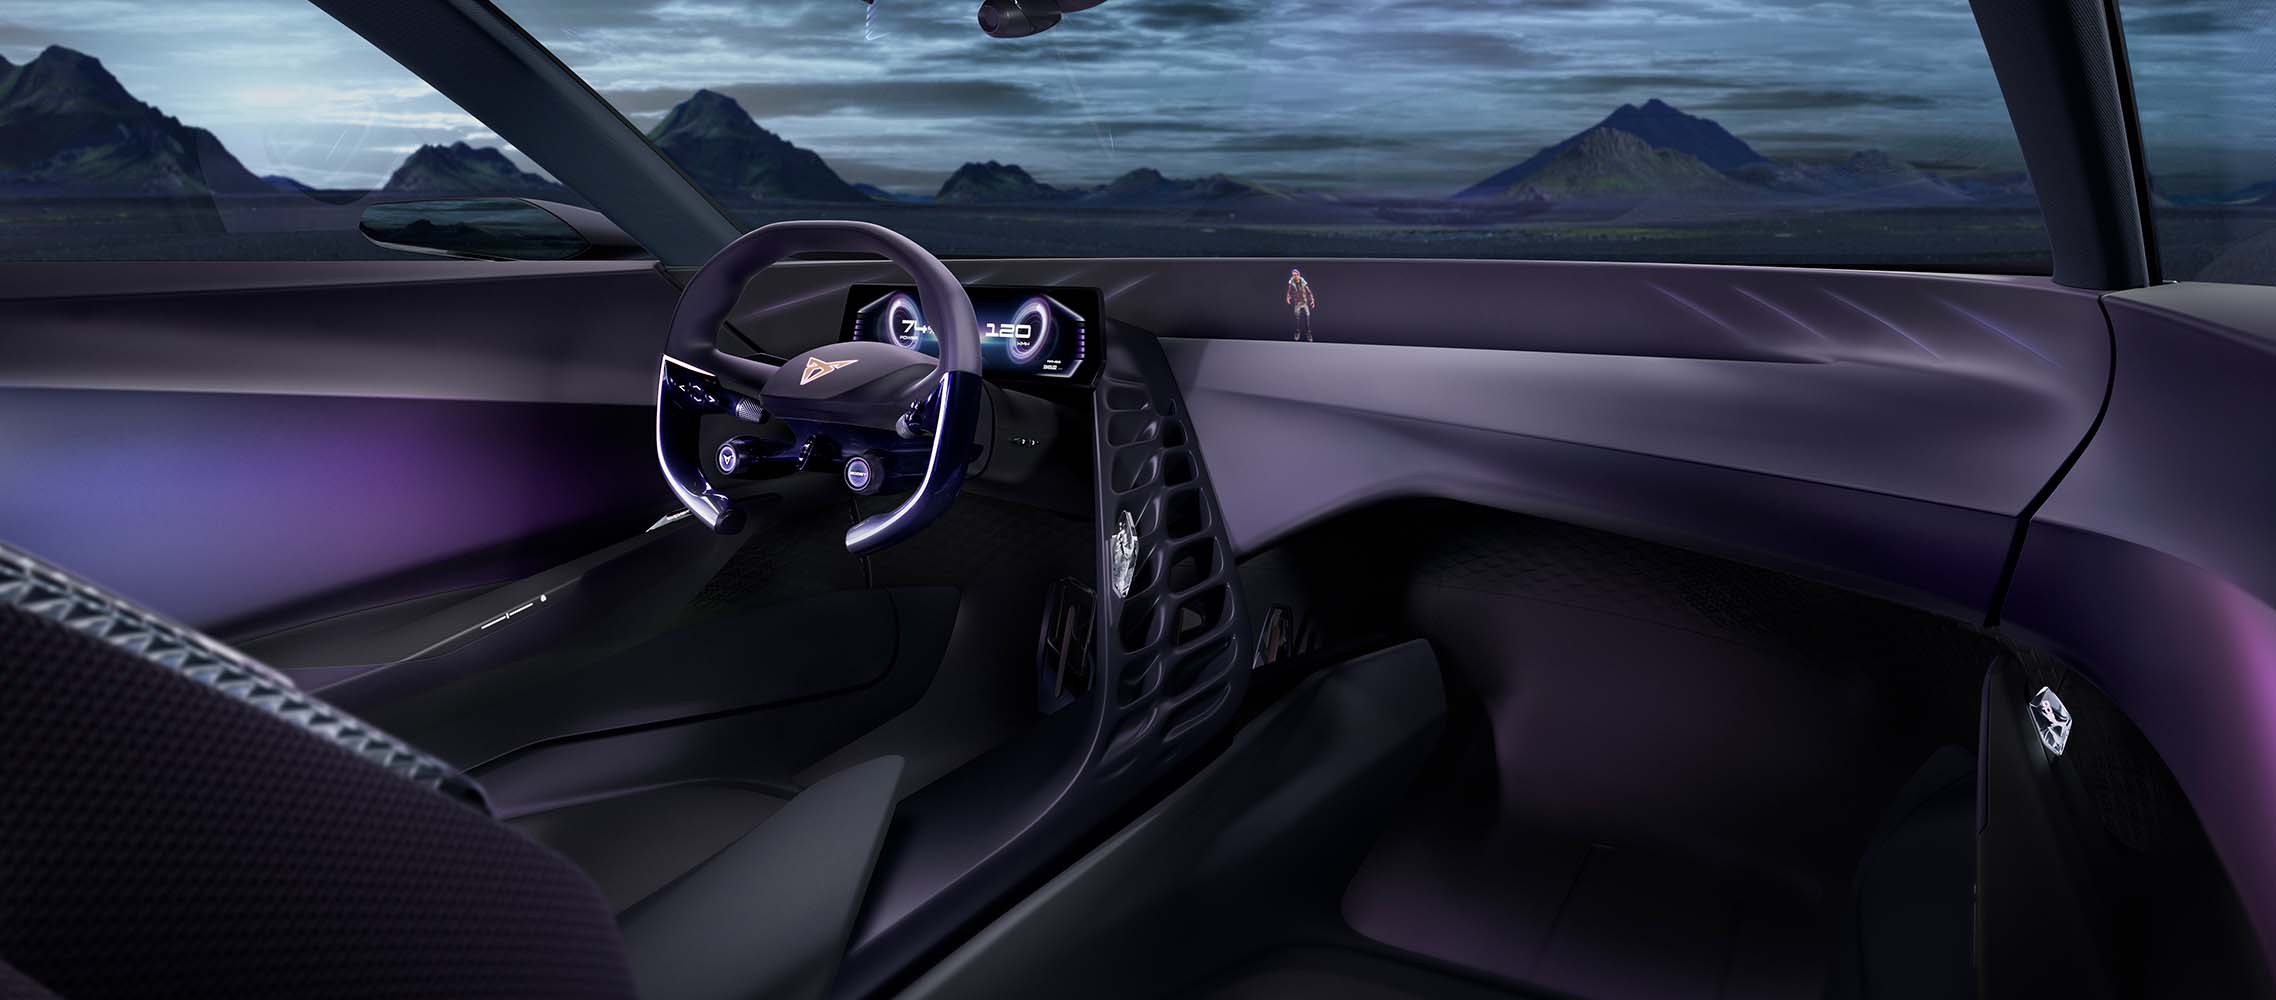 CUPRA Dark Rebel’s interior and dashboard with infotainment system, a metahype avatar and purple ambient lighting